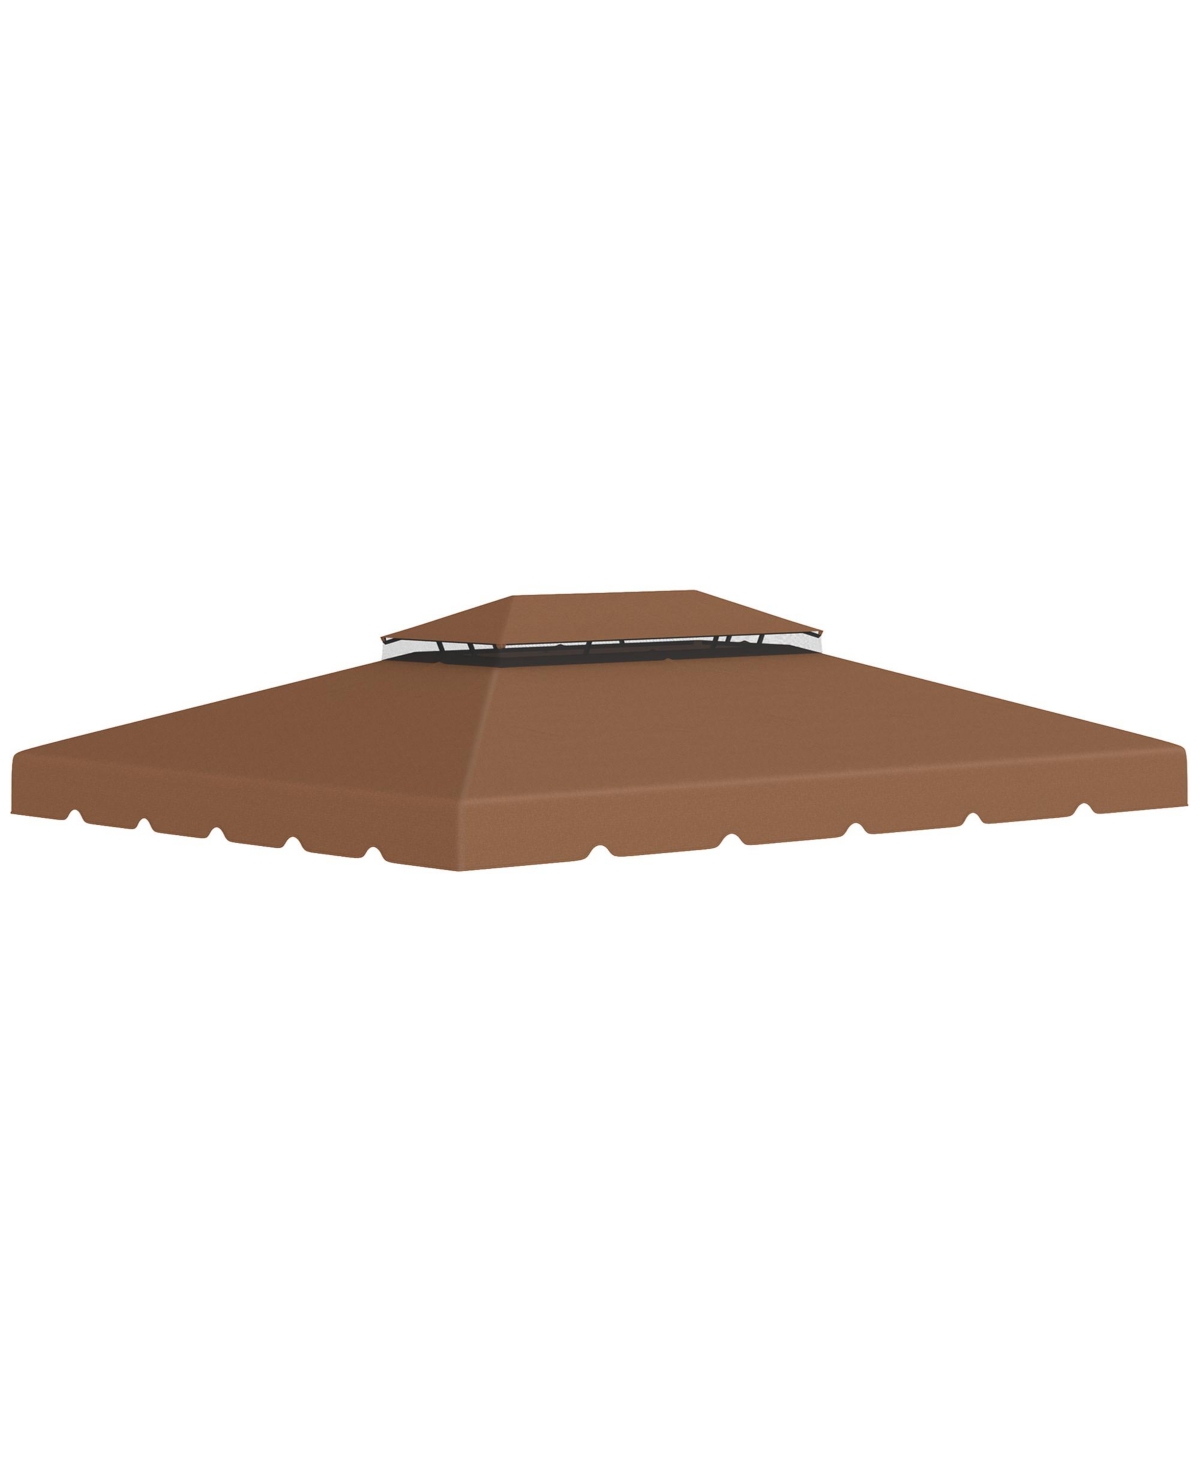 12.8' x 9.5' Gazebo Replacement Canopy, Gazebo Top Cover with Double Vented Roof for Garden Patio Outdoor (Top Only), Coffee - Brown